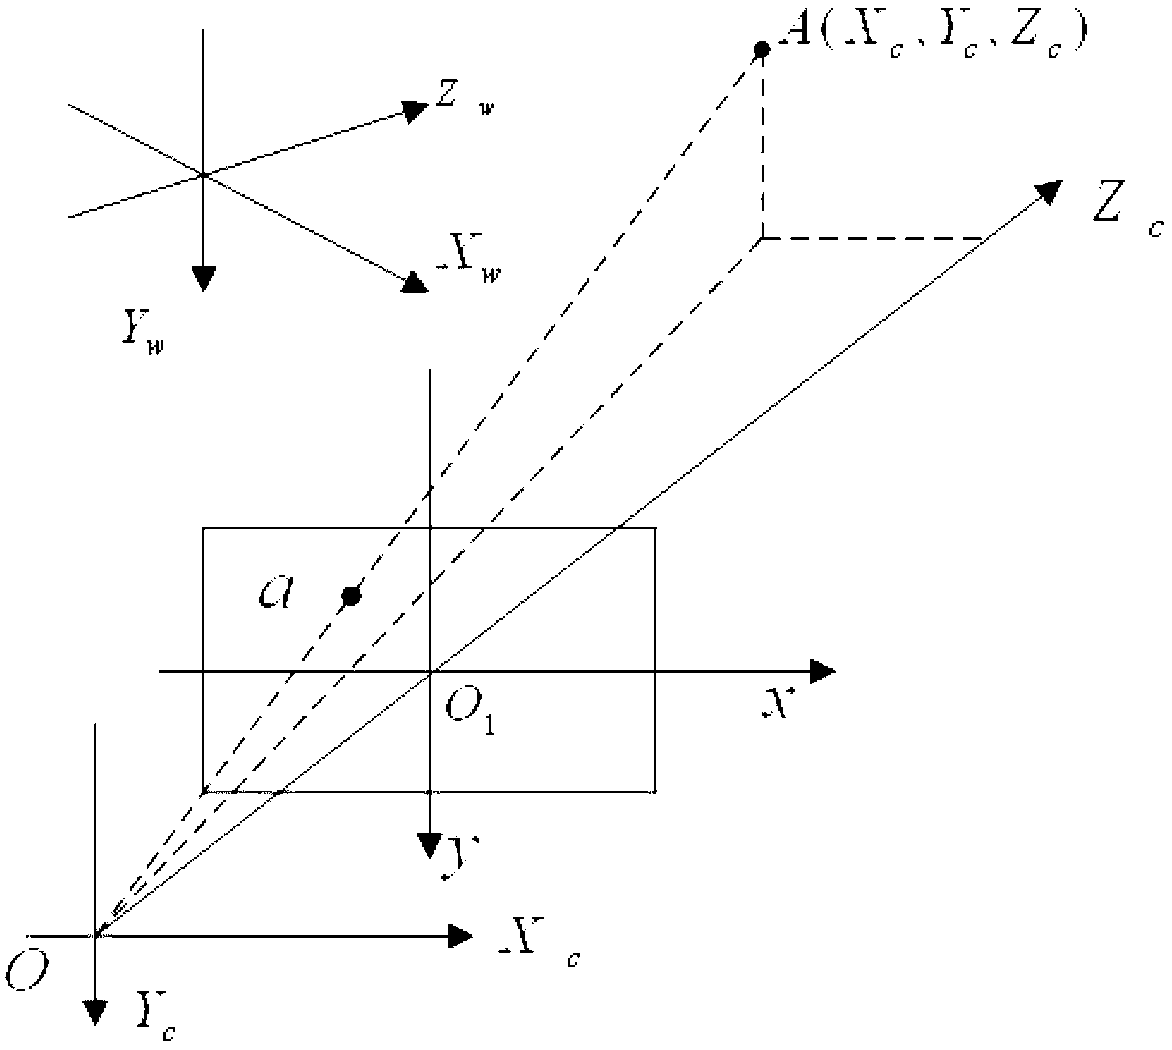 Calibrating method for two-dimensional laser and camera without overlapped viewing fields